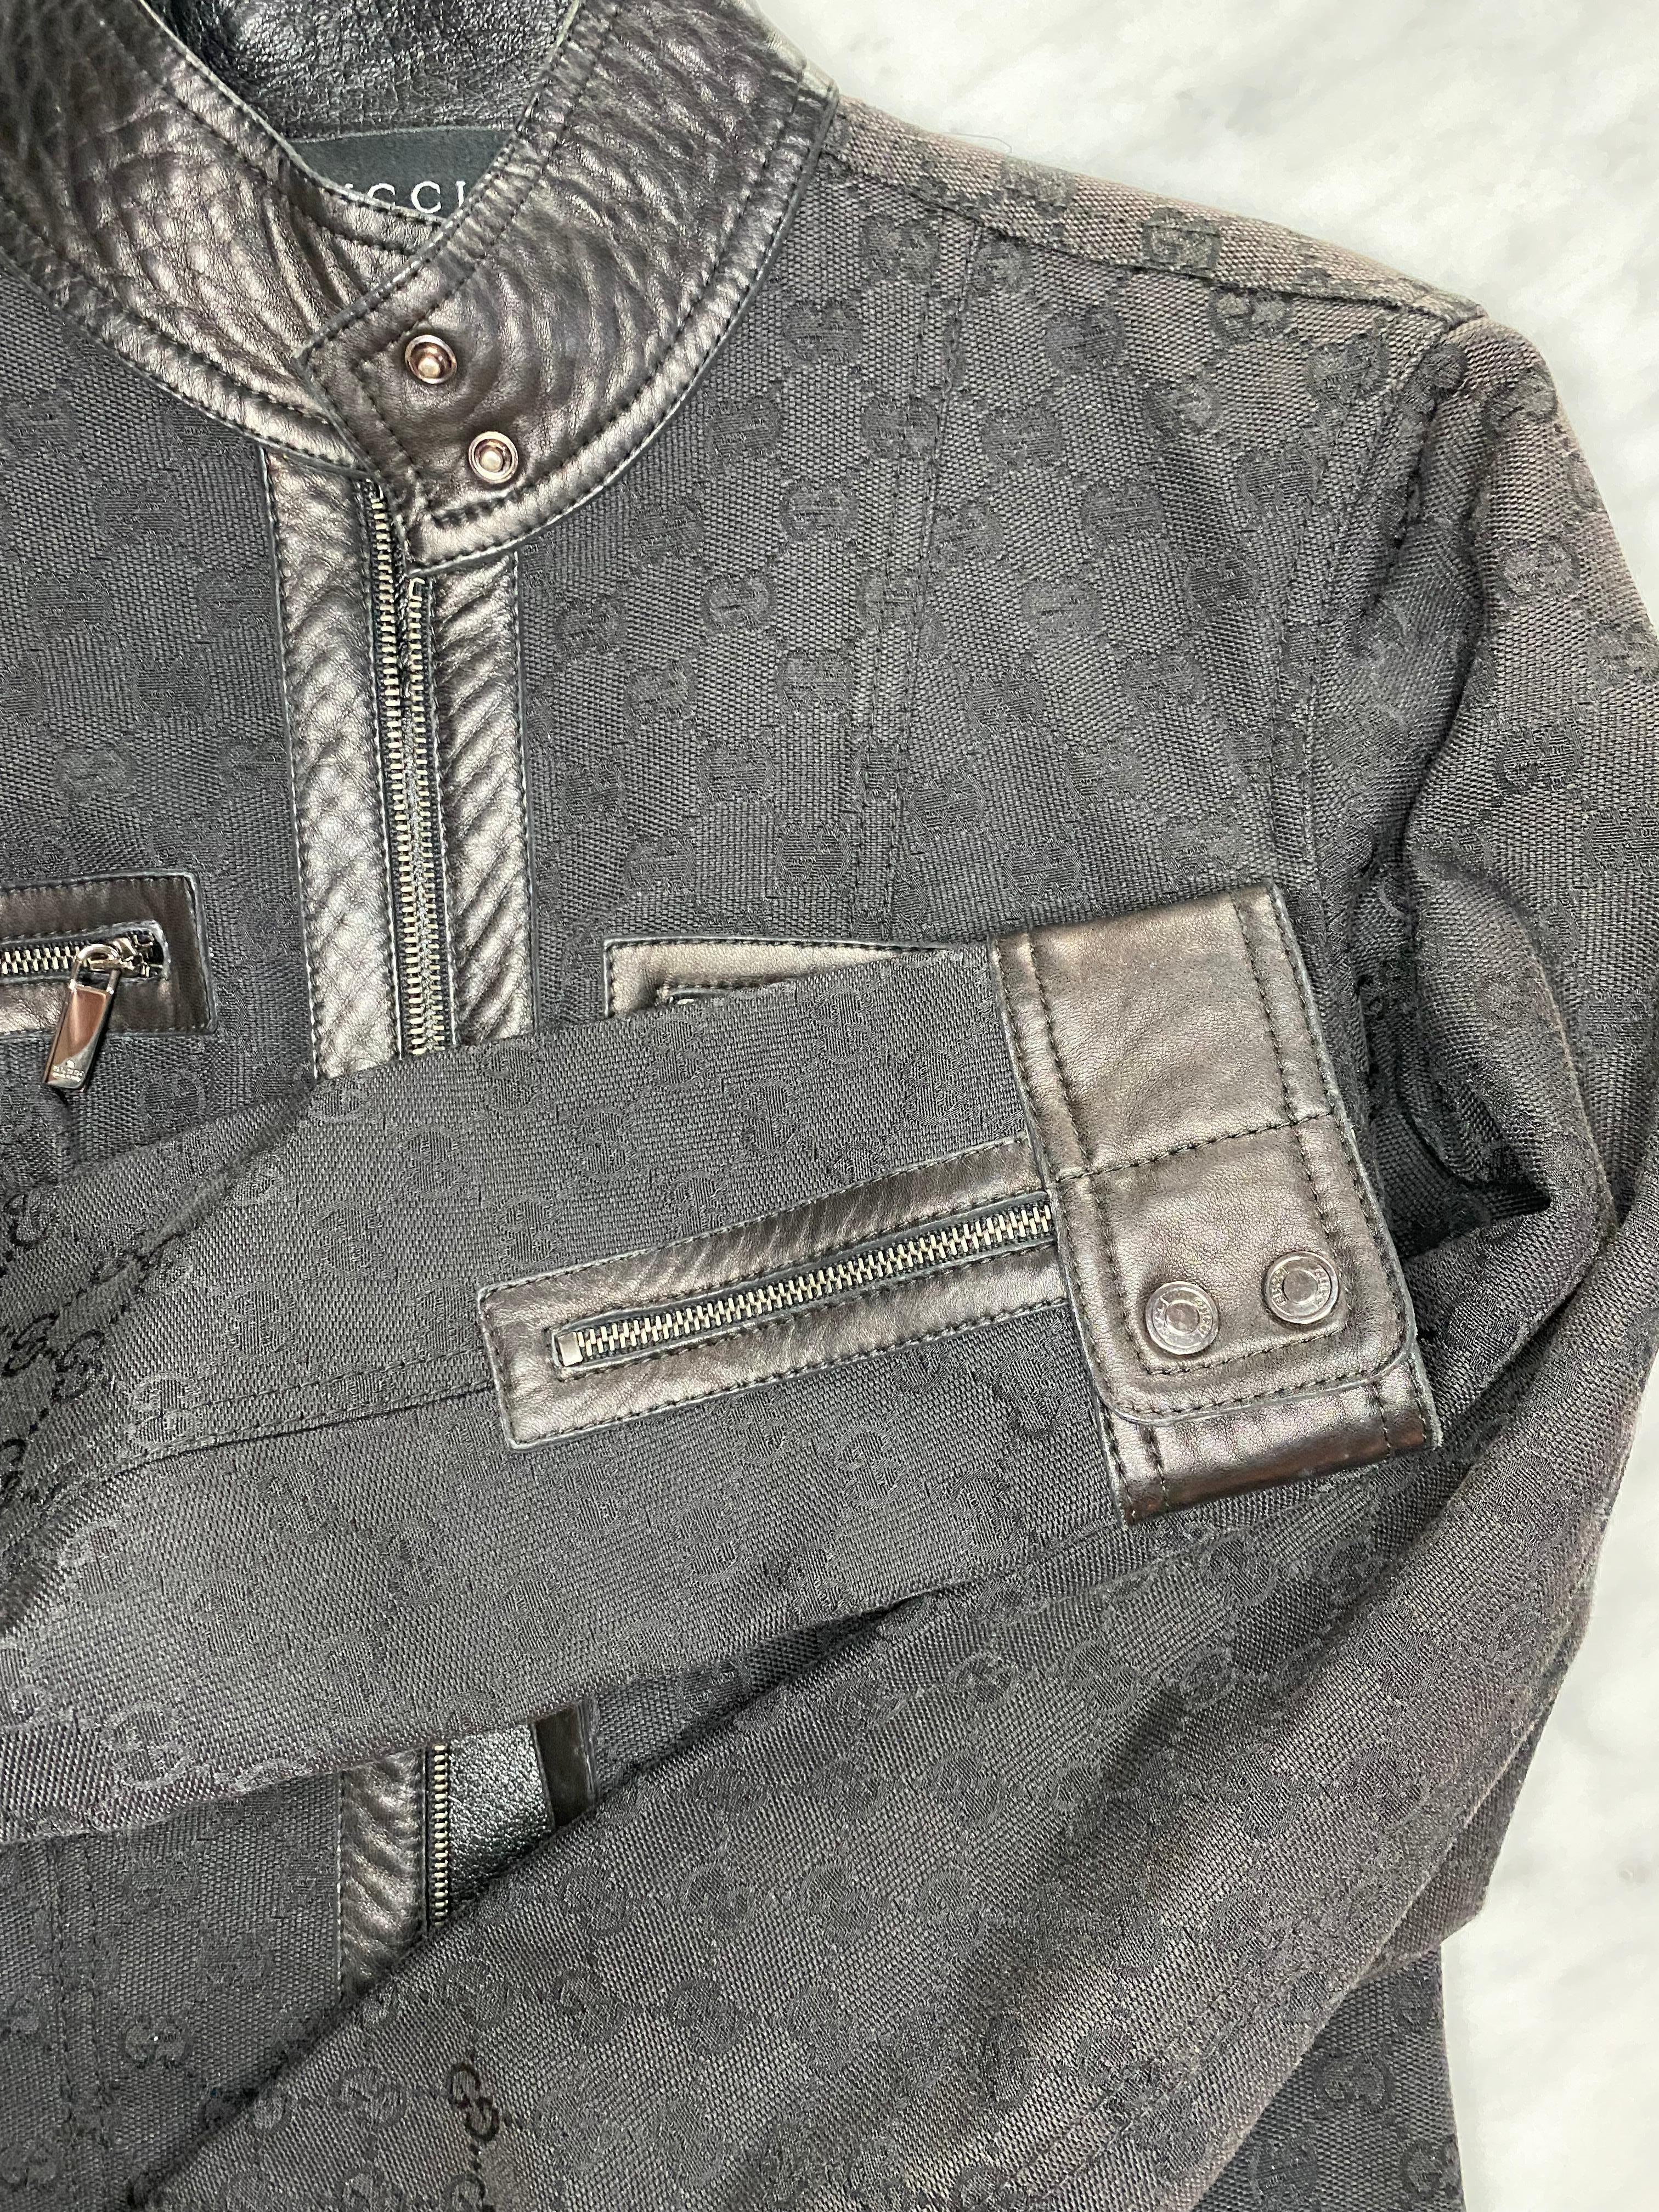 F/W 2000 Gucci by Tom Ford Black GG Monogram Denim & Leather Moto Jacket Vintage In Good Condition For Sale In West Hollywood, CA